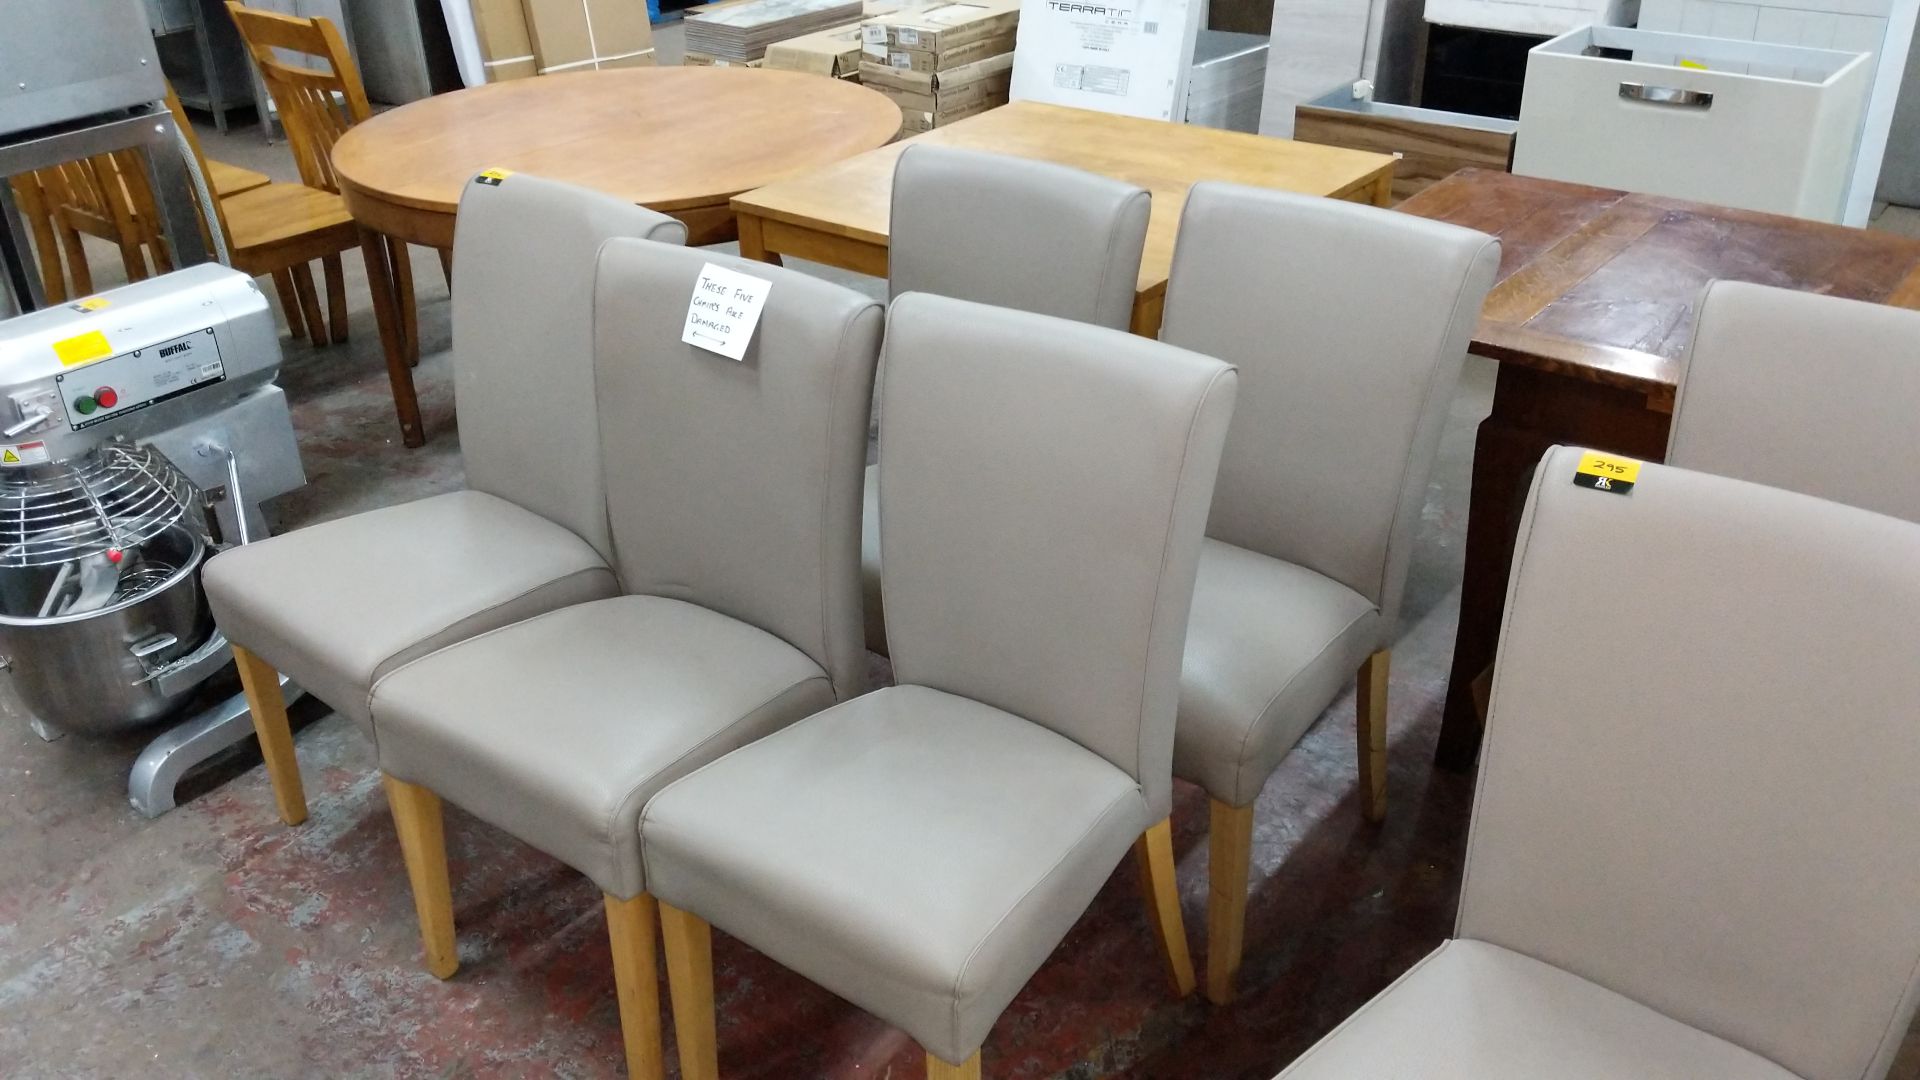 5 off dining chairs with wooden legs, upholstered in taupe leatherette type fabric, understood to - Image 4 of 5